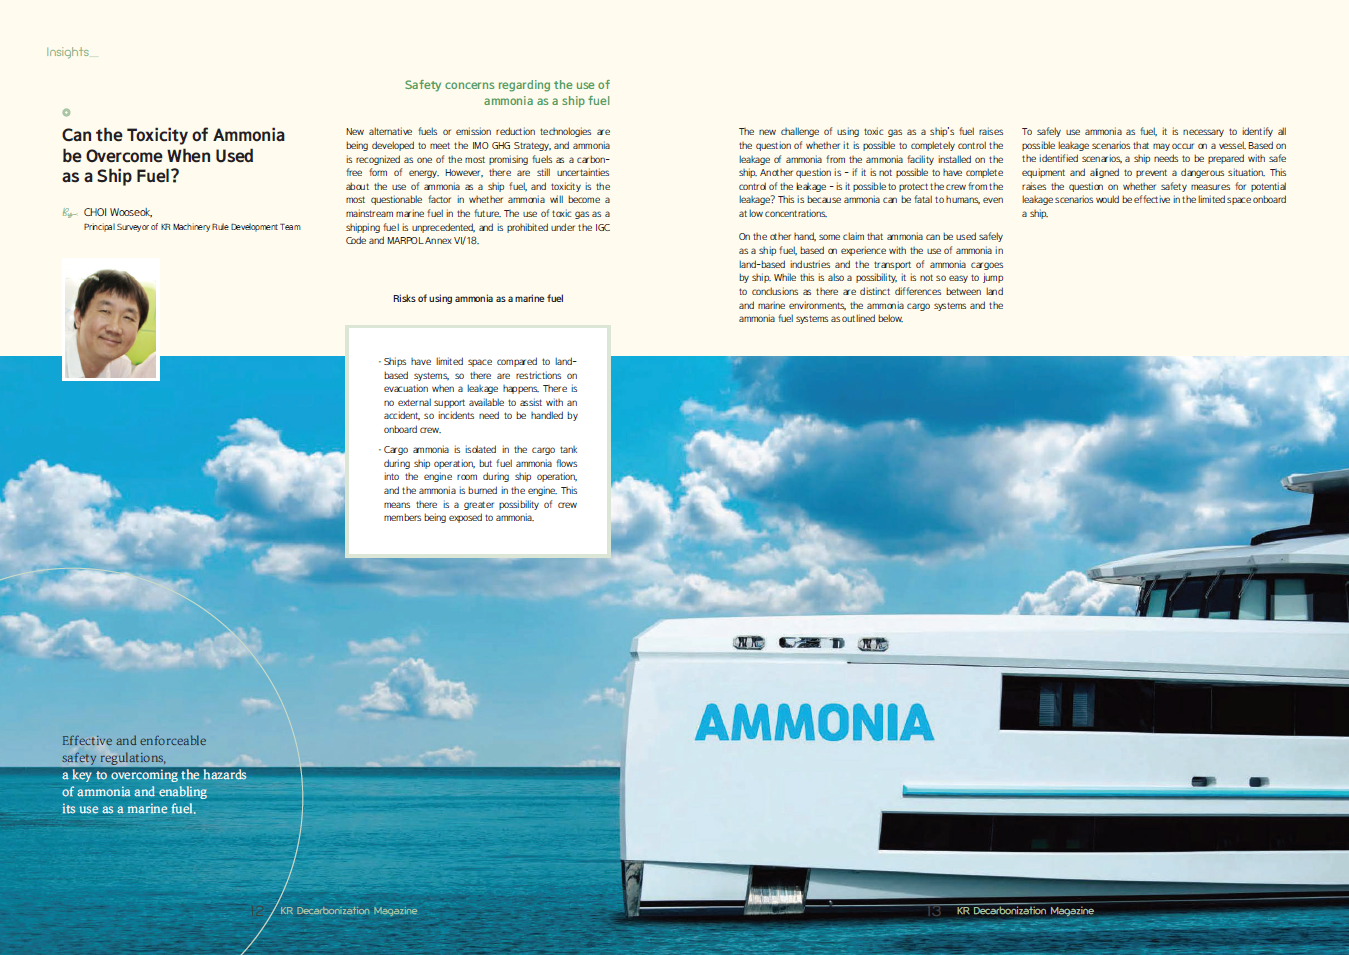 Can the Toxicity of Ammonia be Overcome When Used as a Ship Fuel?